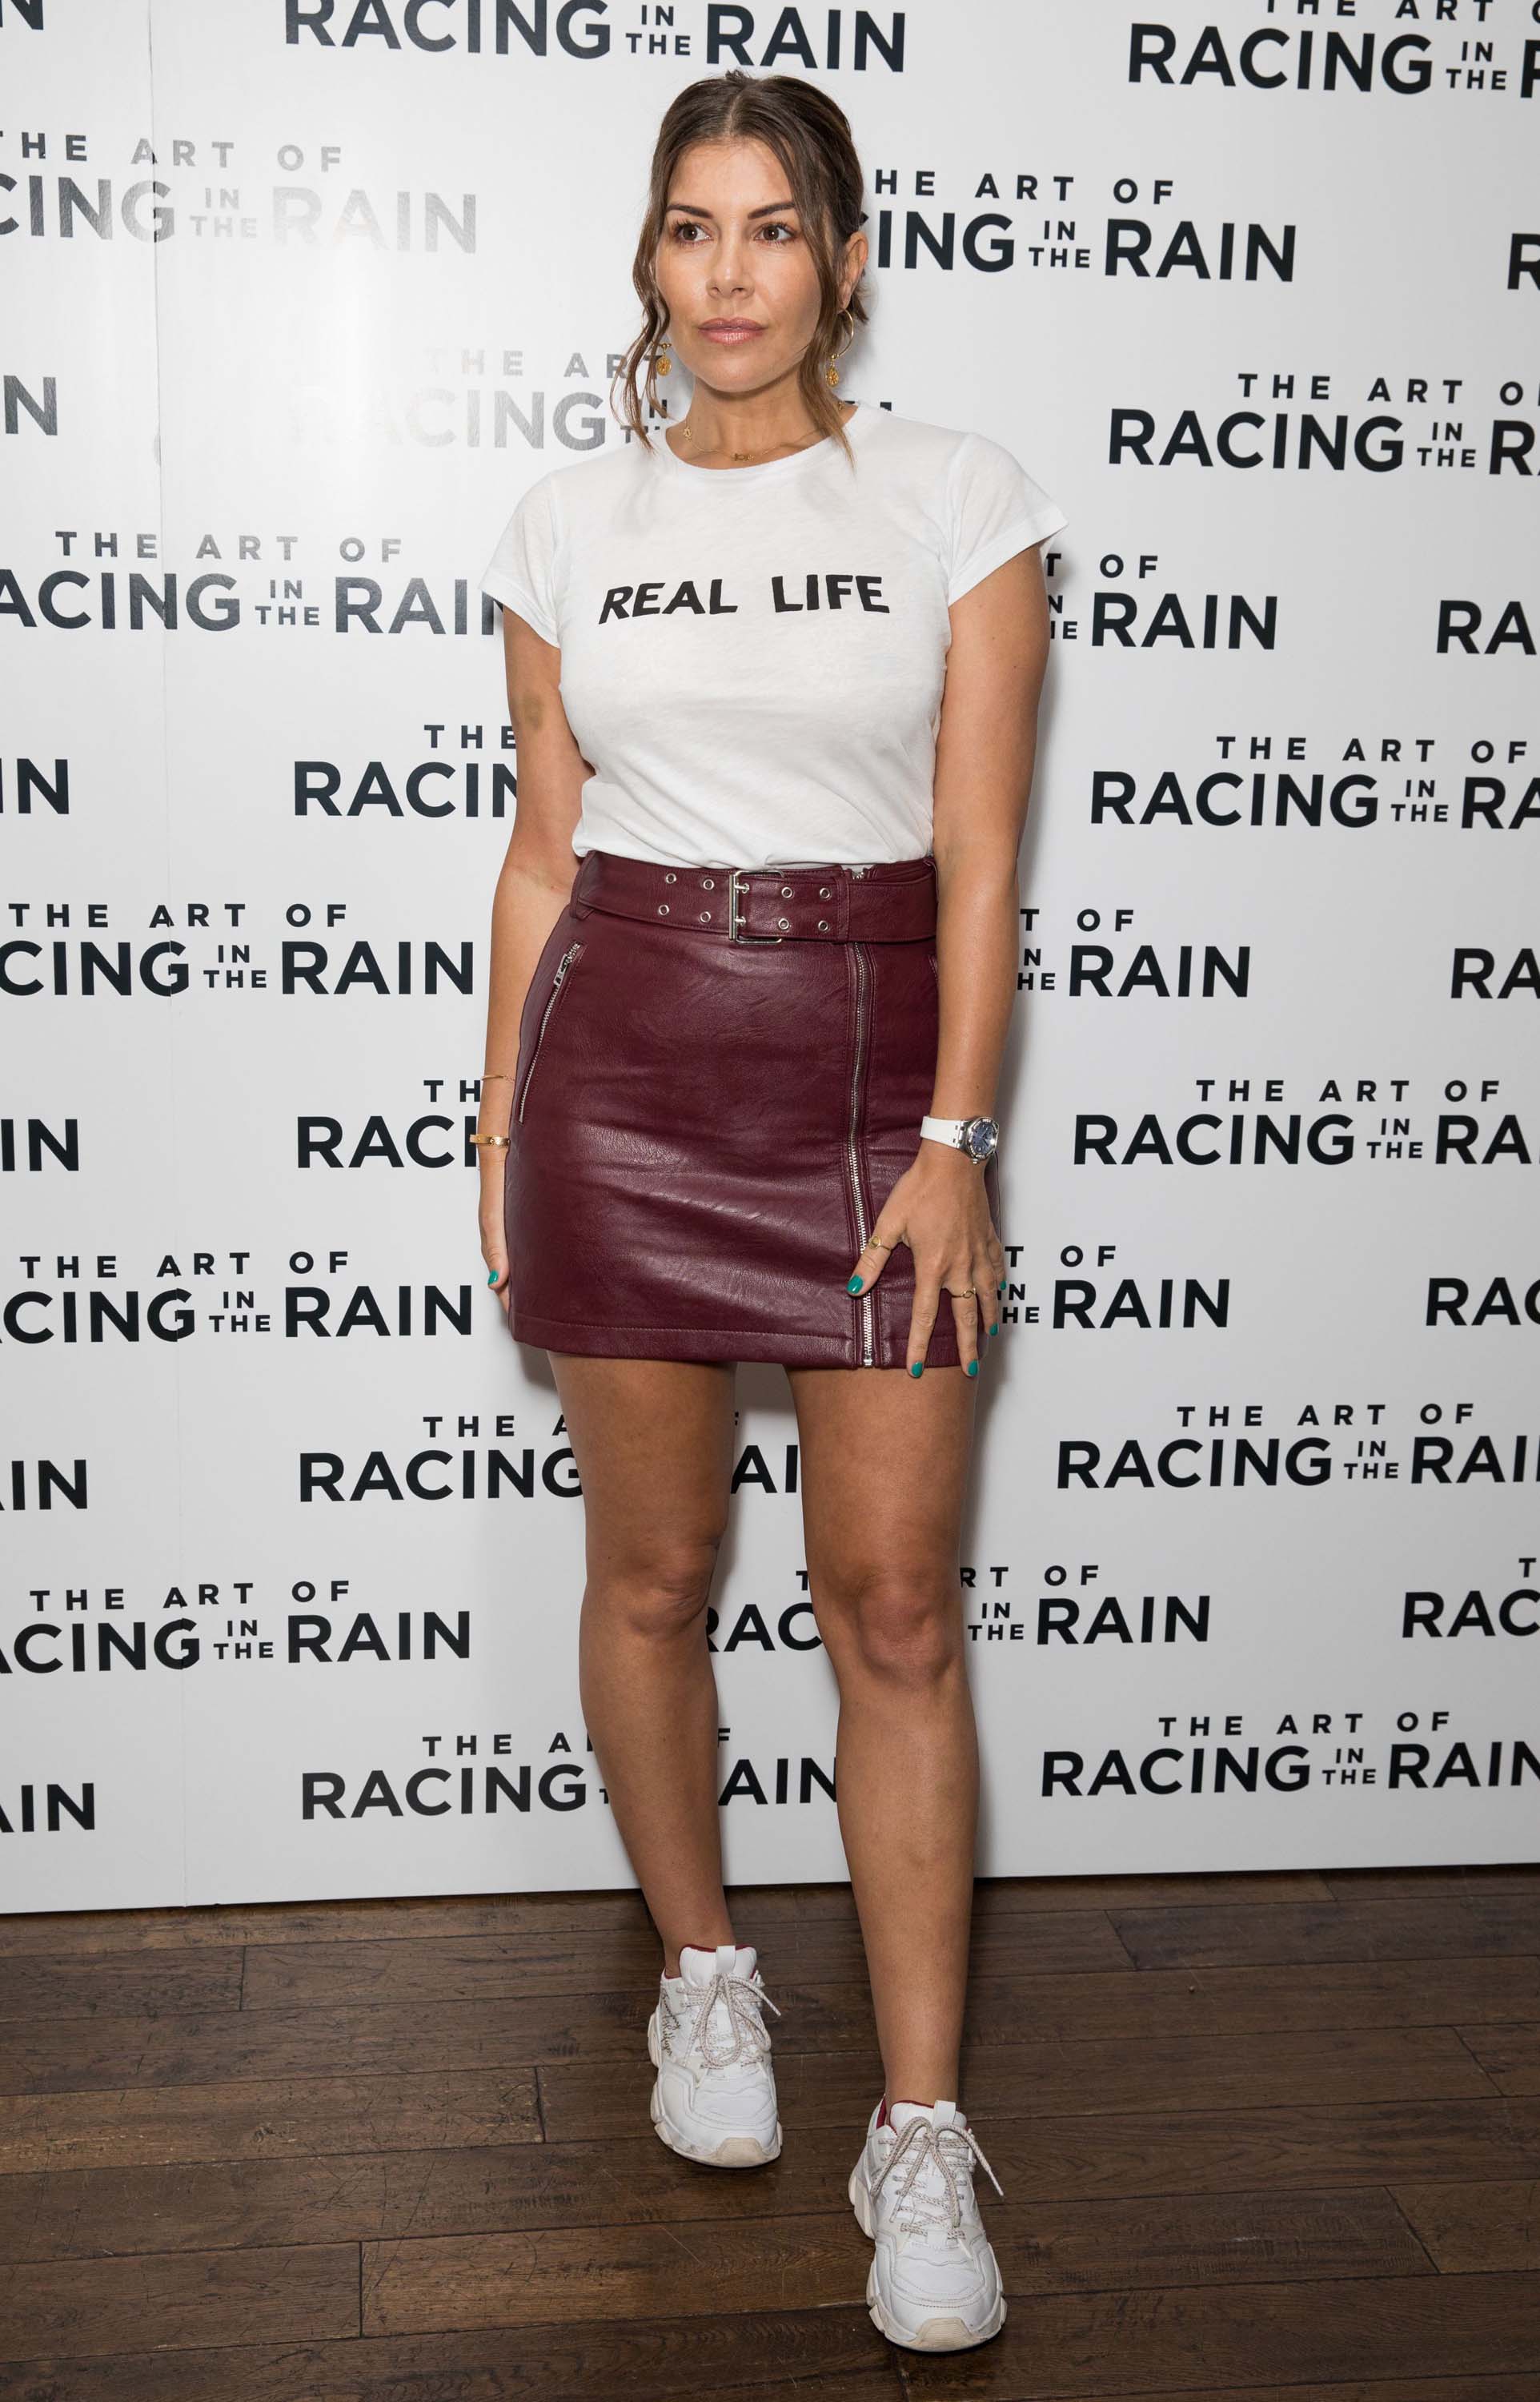 Imogen Thomas attends The Art of Racing in the Rain a special screening at the Picturehouse Central